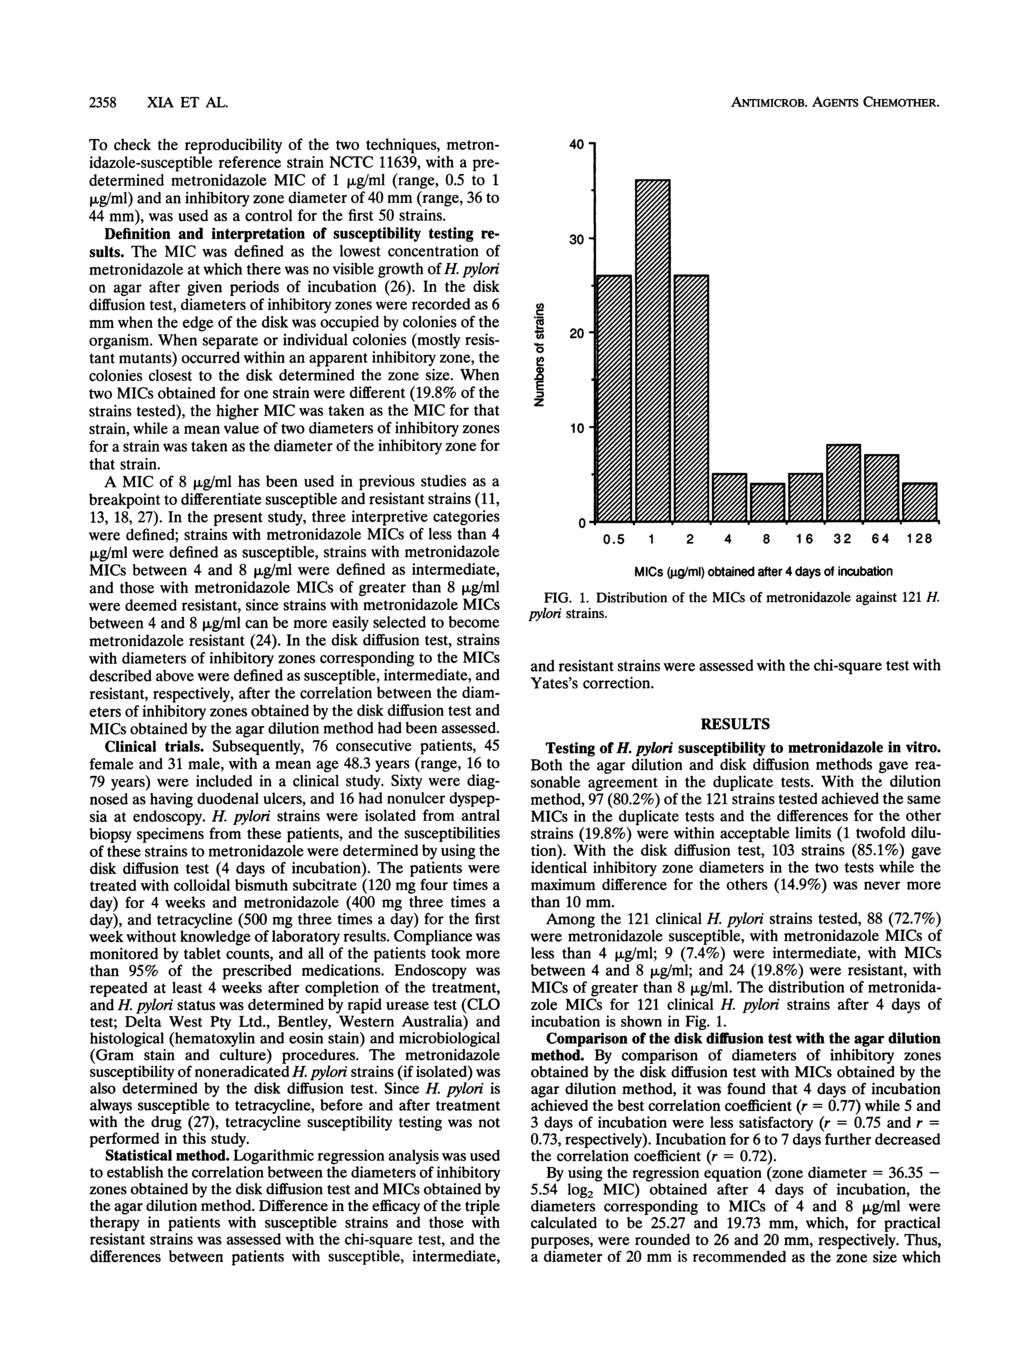 2358 XIA ET AL. To check the reproducibility of the two techniques, metronidazole-susceptible reference strain NCTC 11639, with a predetermined metronidazole MIC of 1,ug/ml (range,.